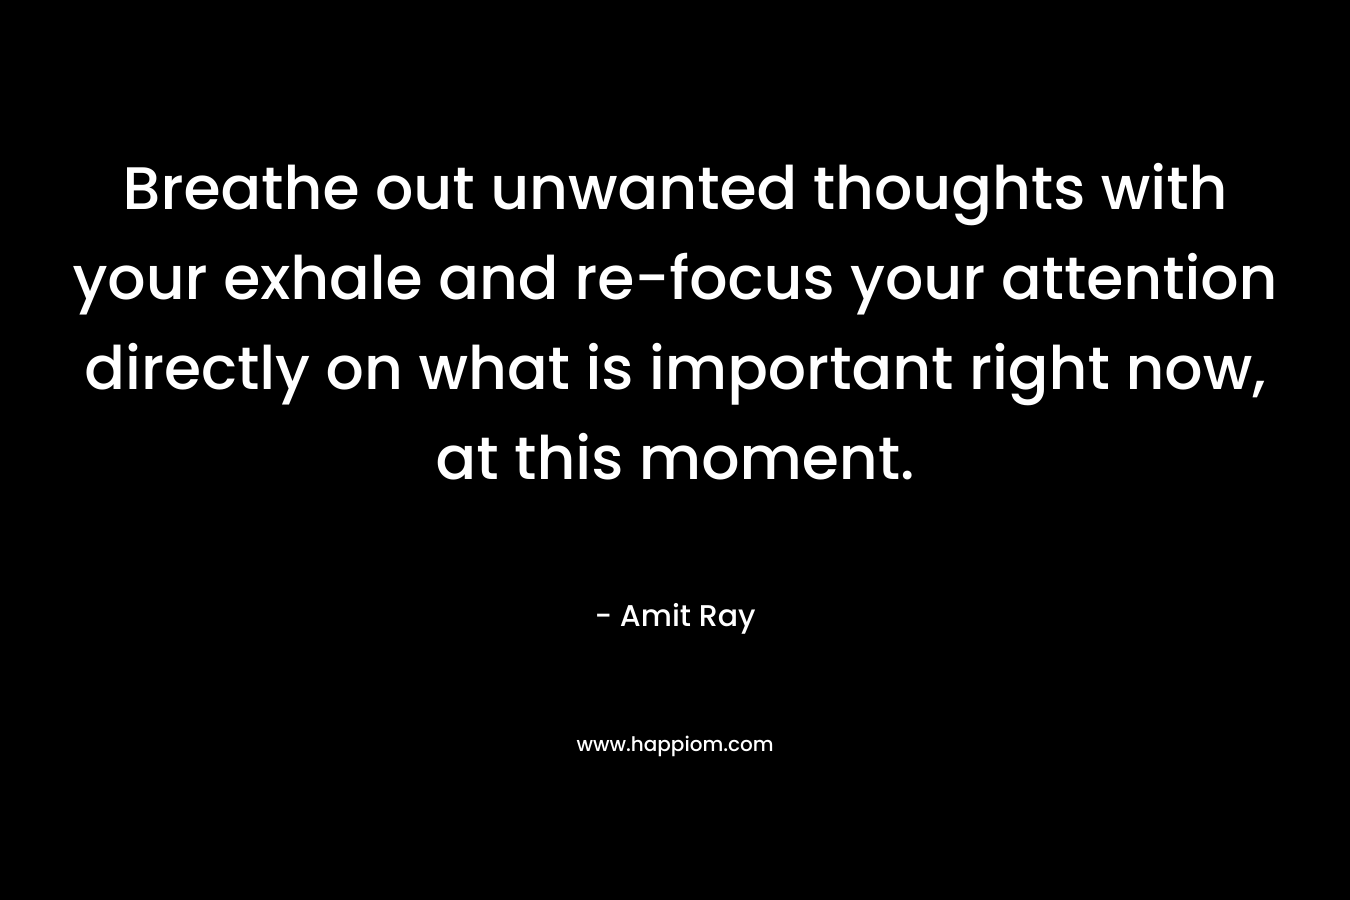 Breathe out unwanted thoughts with your exhale and re-focus your attention directly on what is important right now, at this moment. – Amit Ray